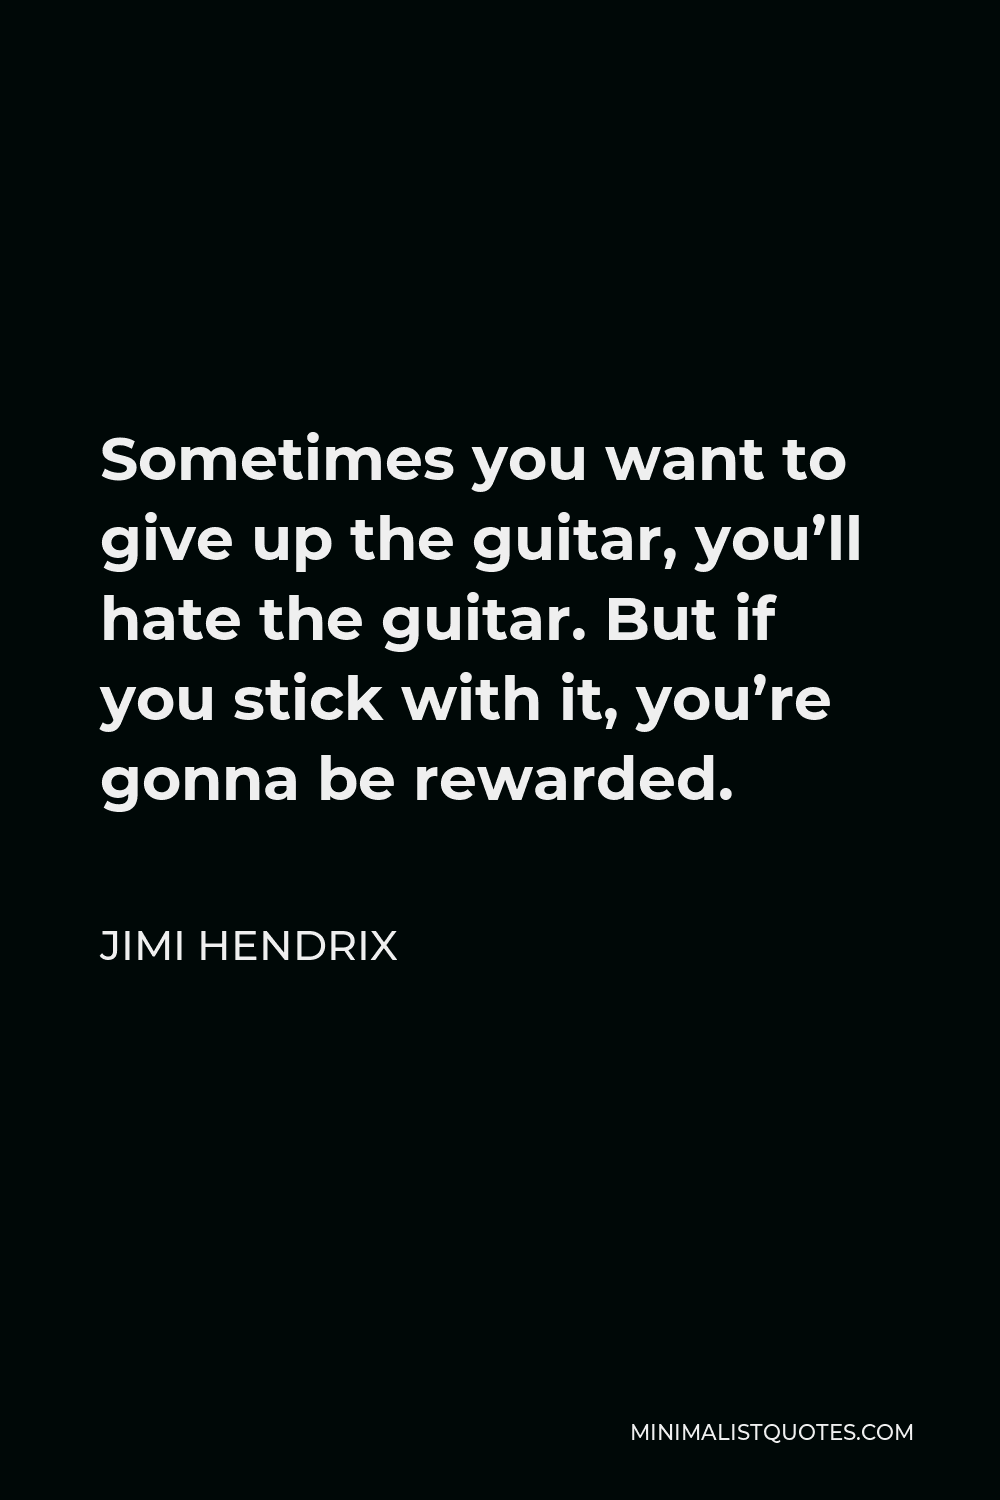 Jimi Hendrix Quote - Sometimes you want to give up the guitar, you’ll hate the guitar. But if you stick with it, you’re gonna be rewarded.